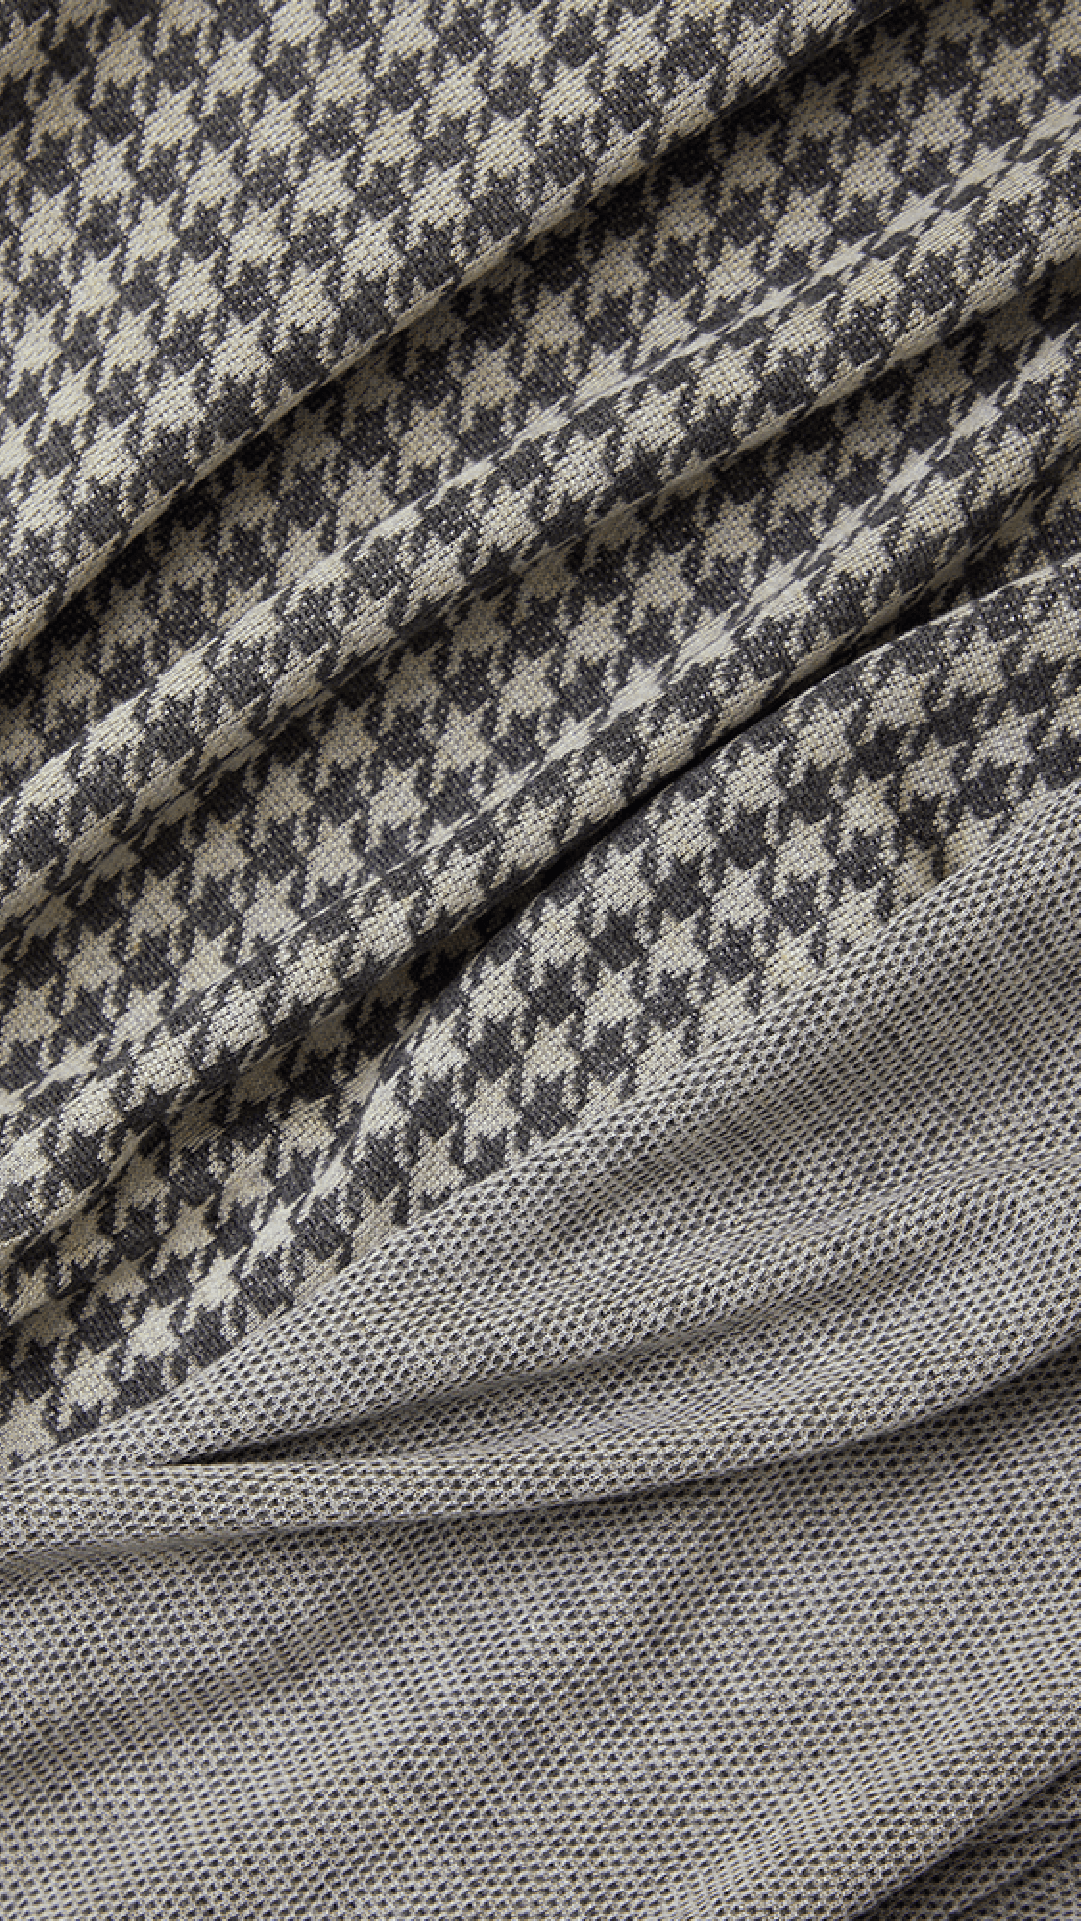 Close up image of double-knit Stormy Houndstooth print